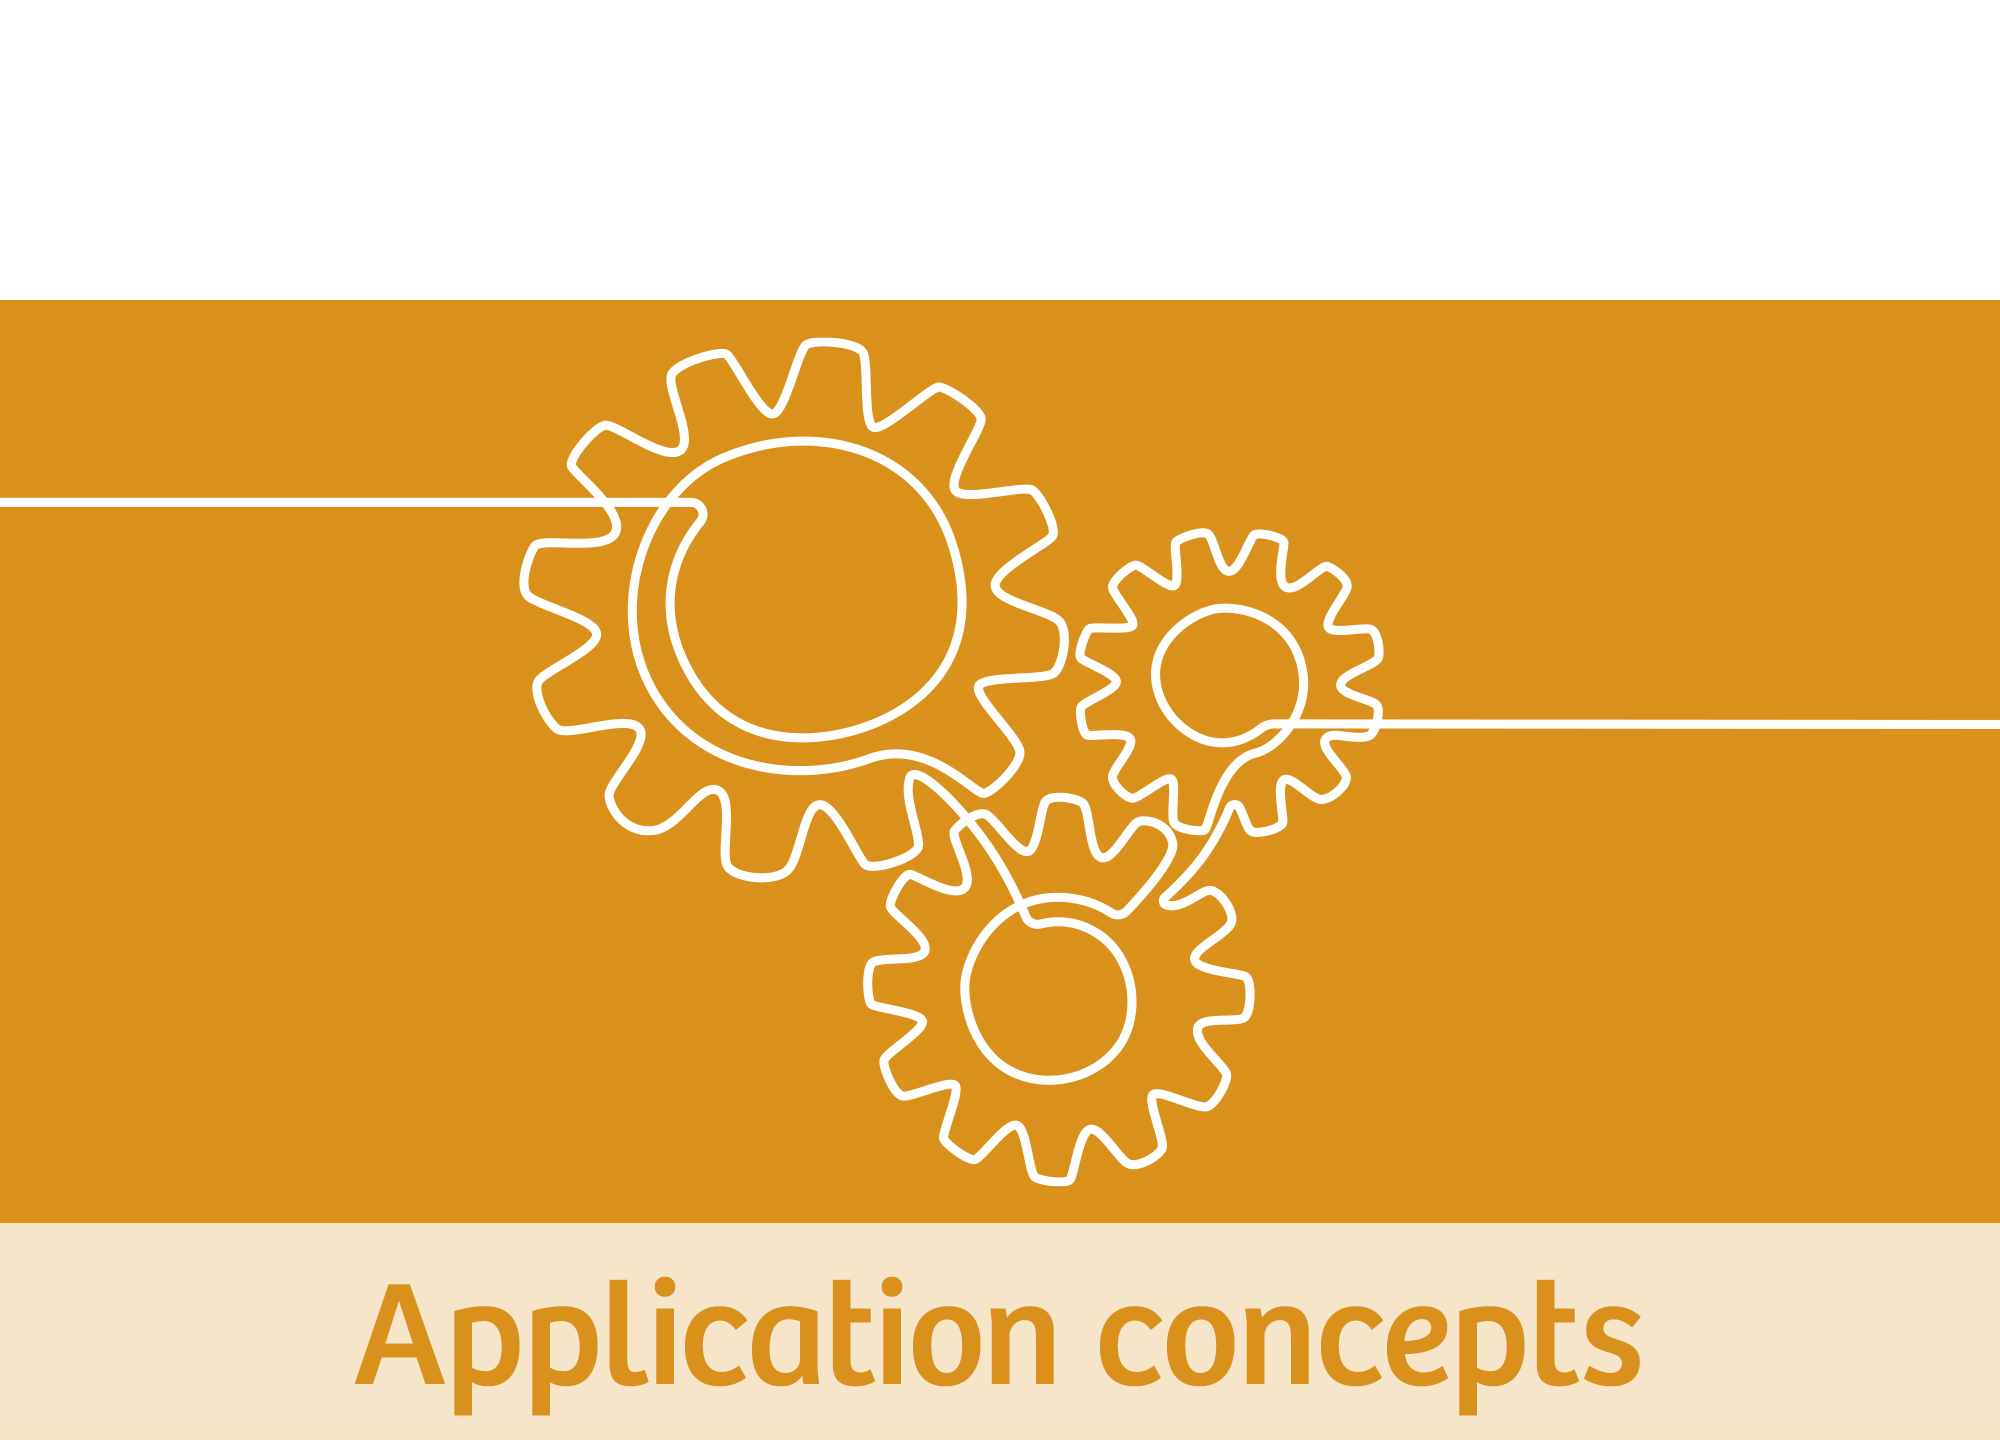 DrDeppe - Application concepts